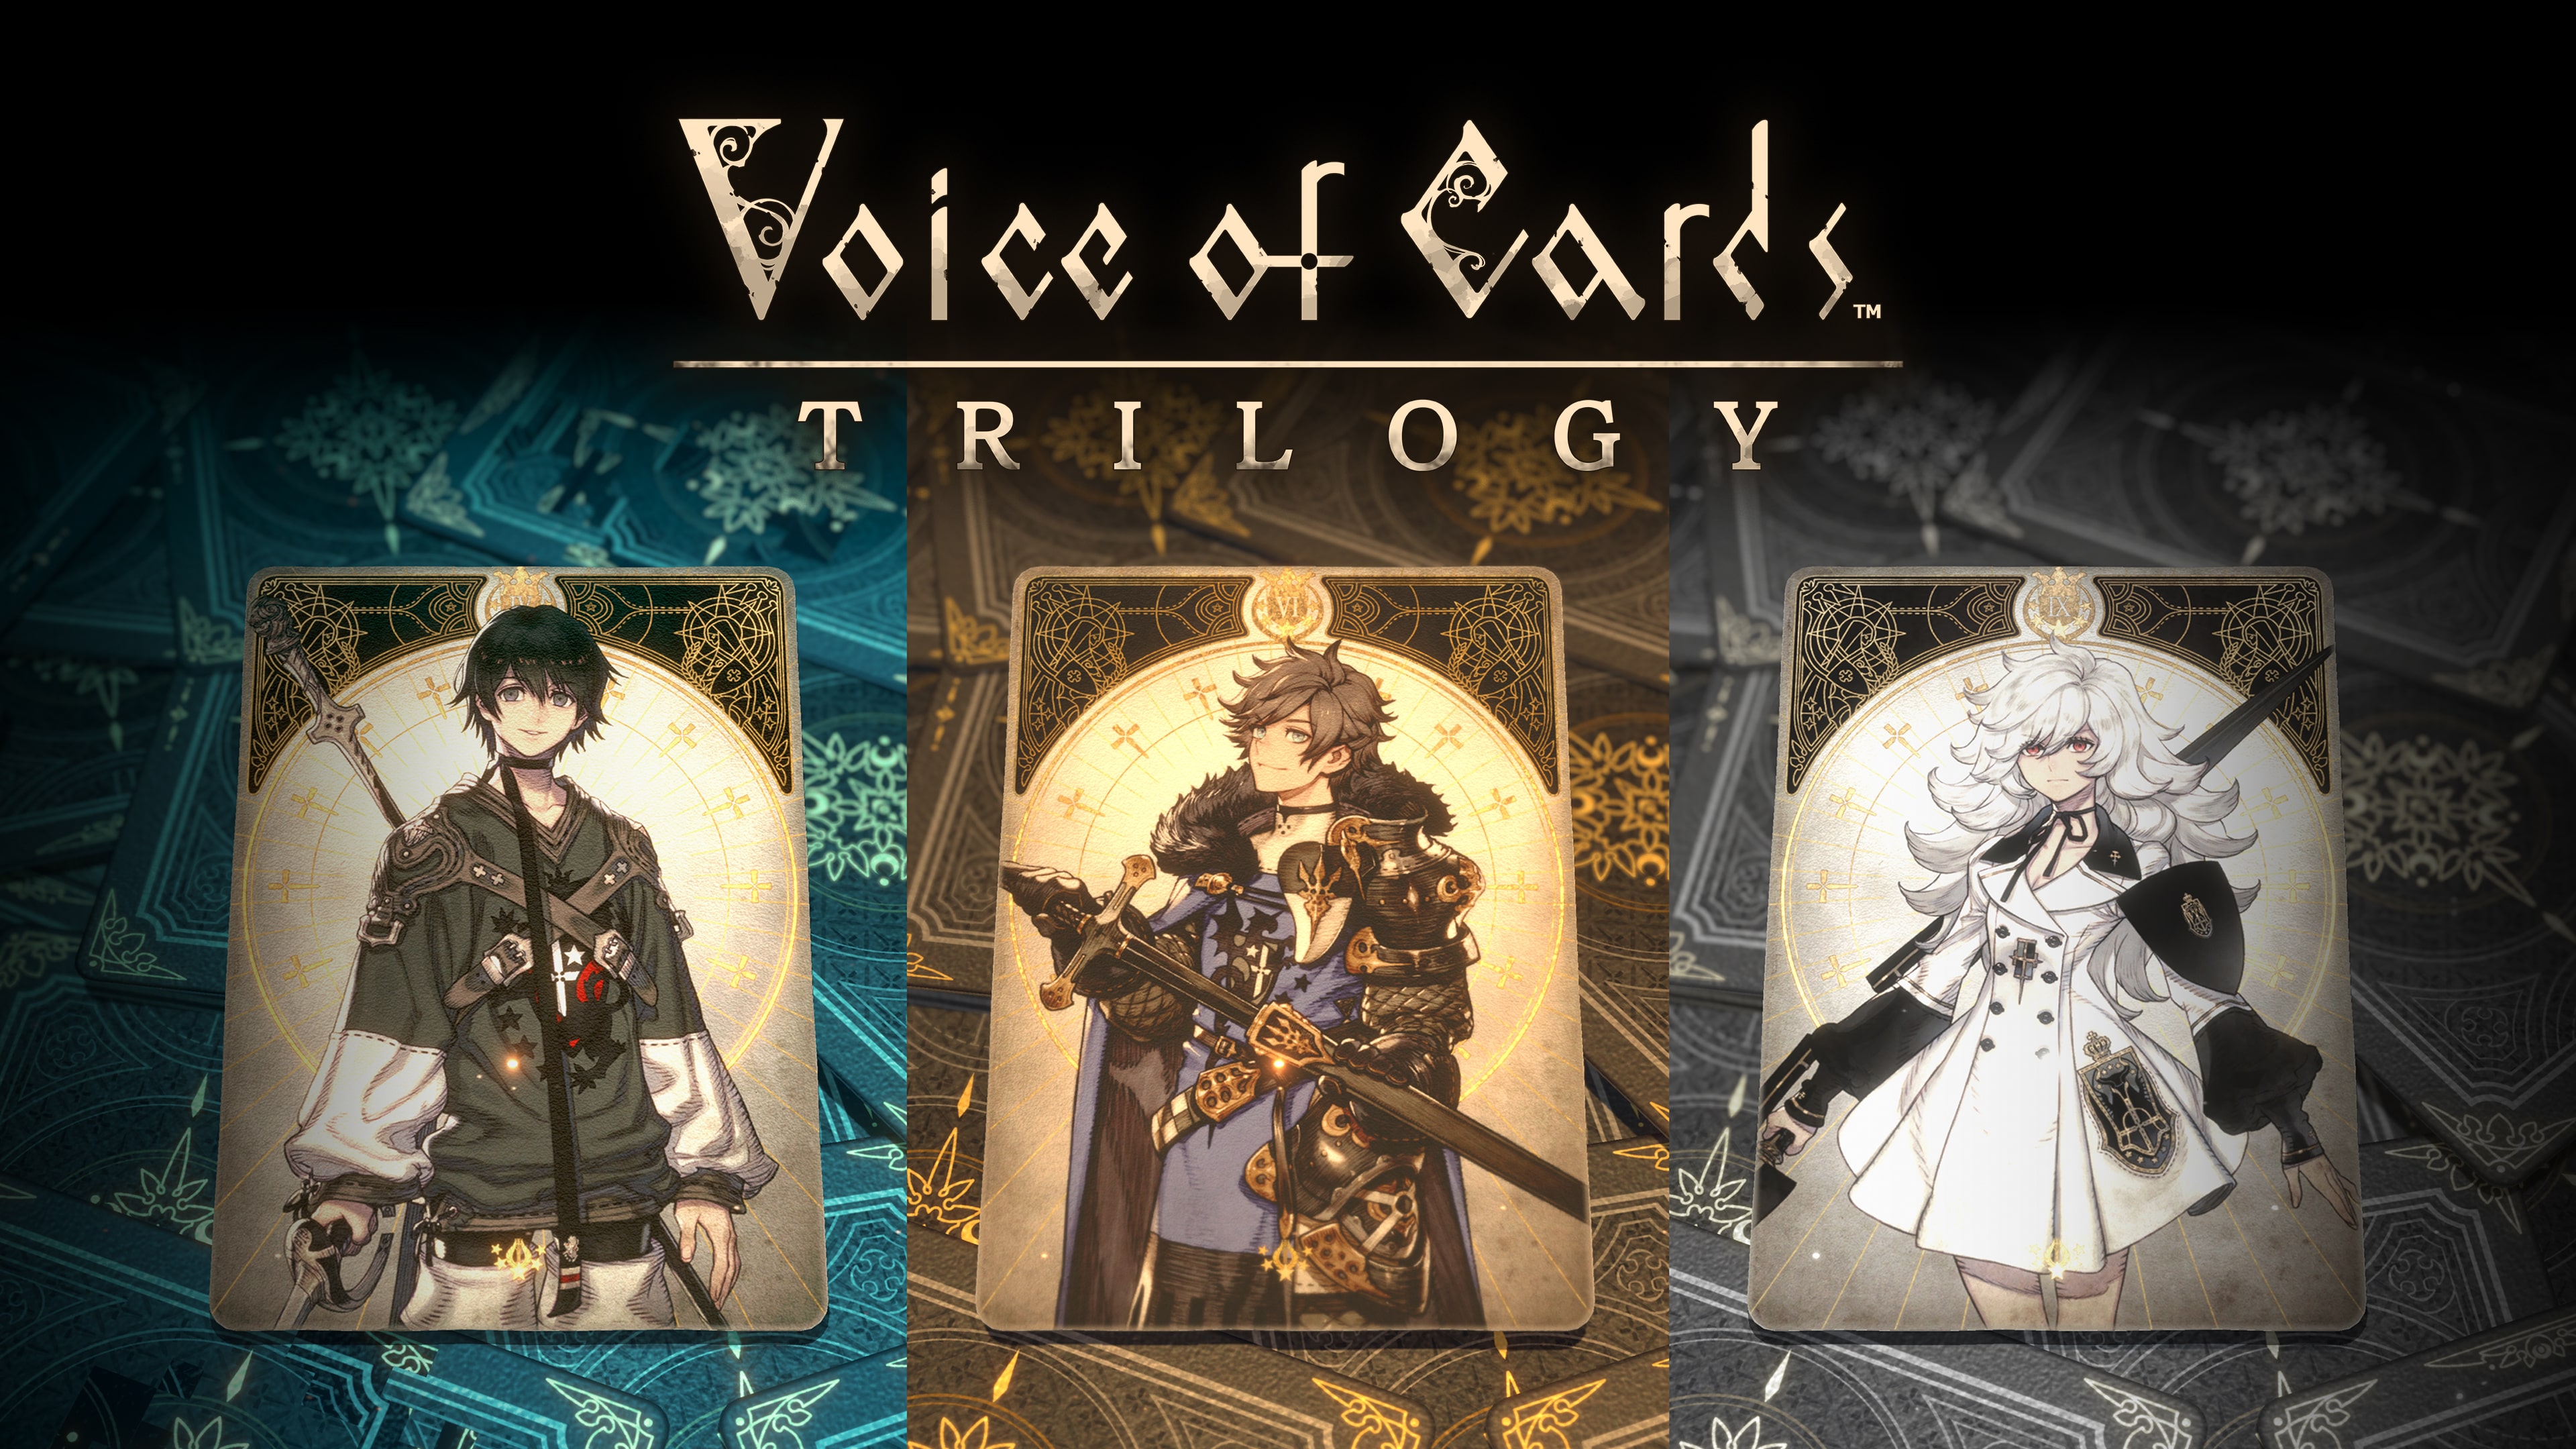 Voice of Cards Trilogy (English, Japanese)